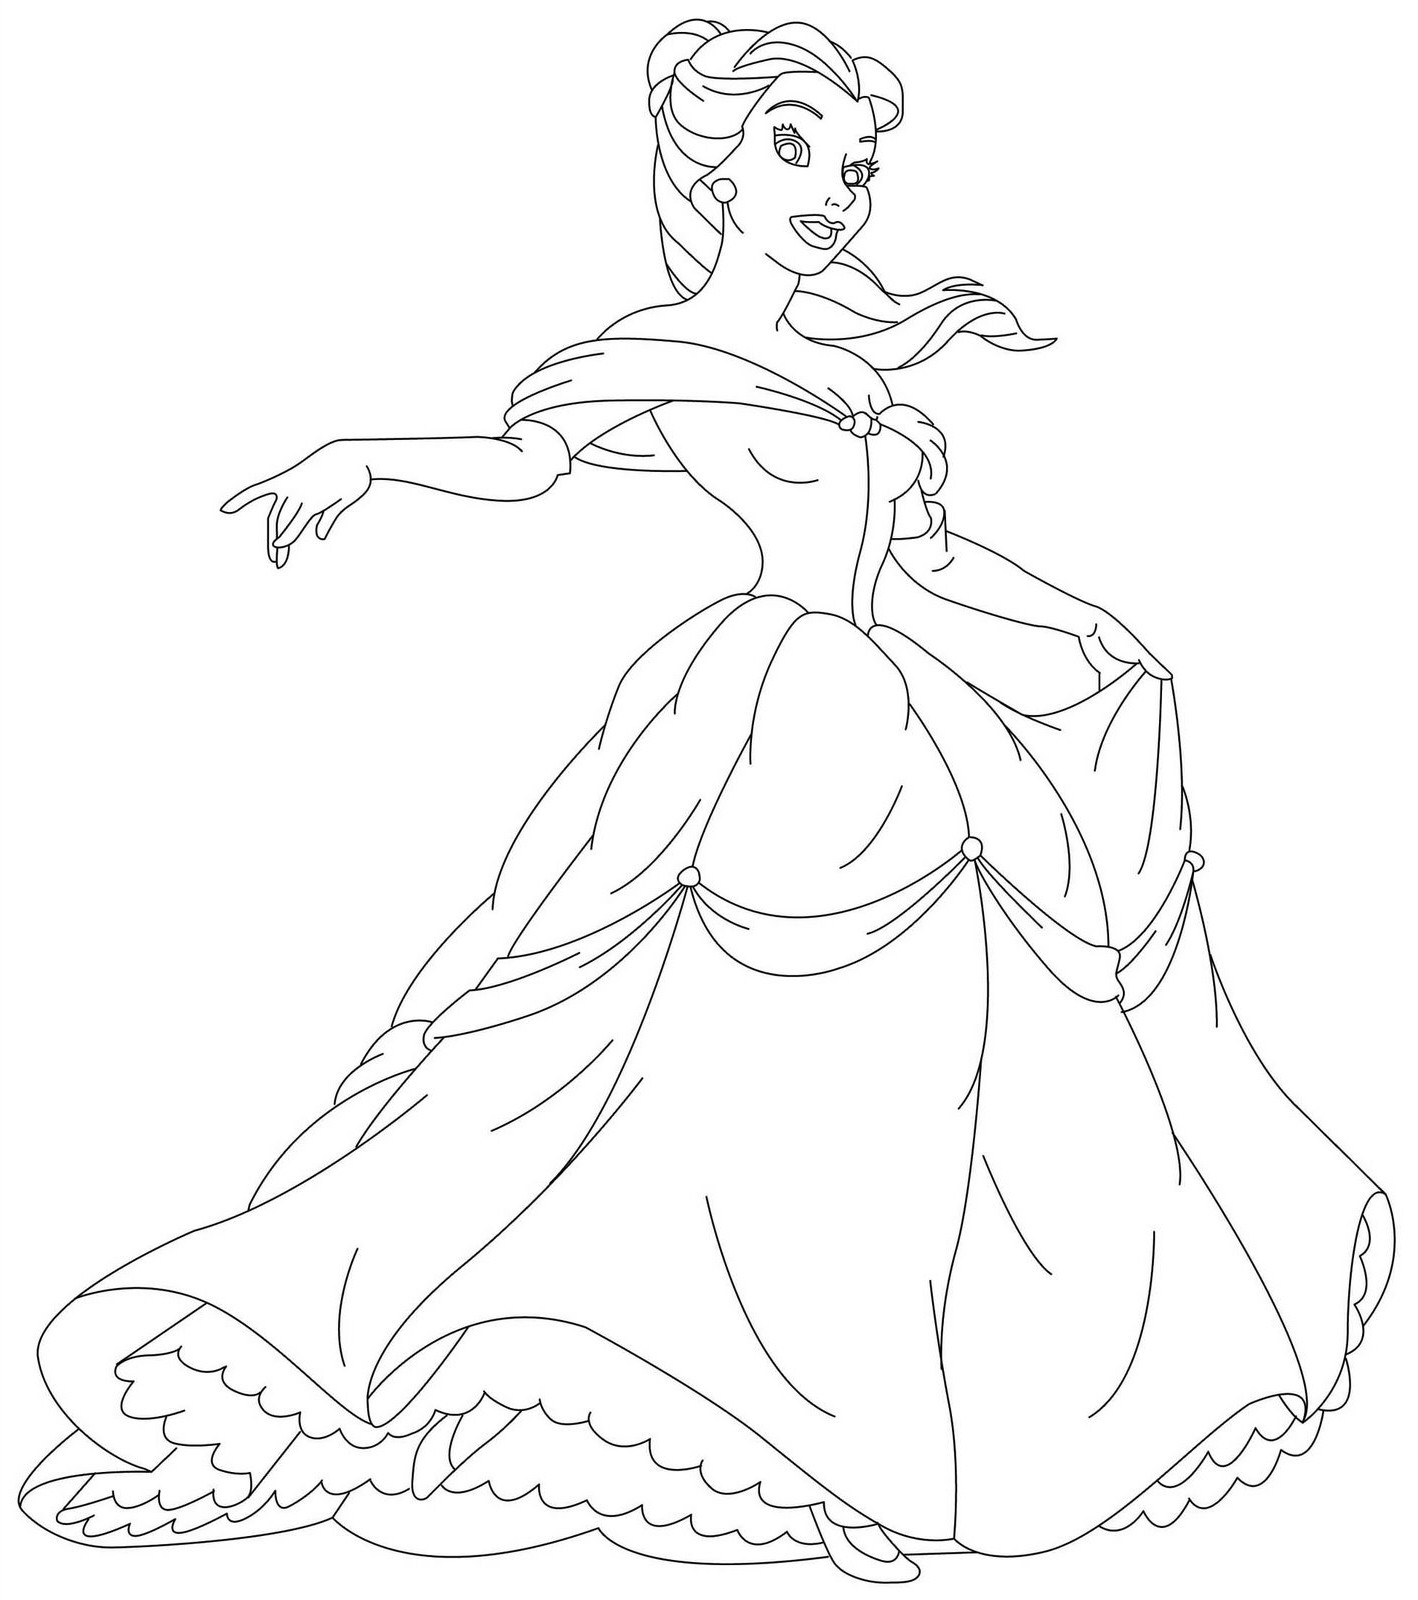 Disney Coloring Pages Free
 Free Printable Disney Princess Coloring Pages For Kids